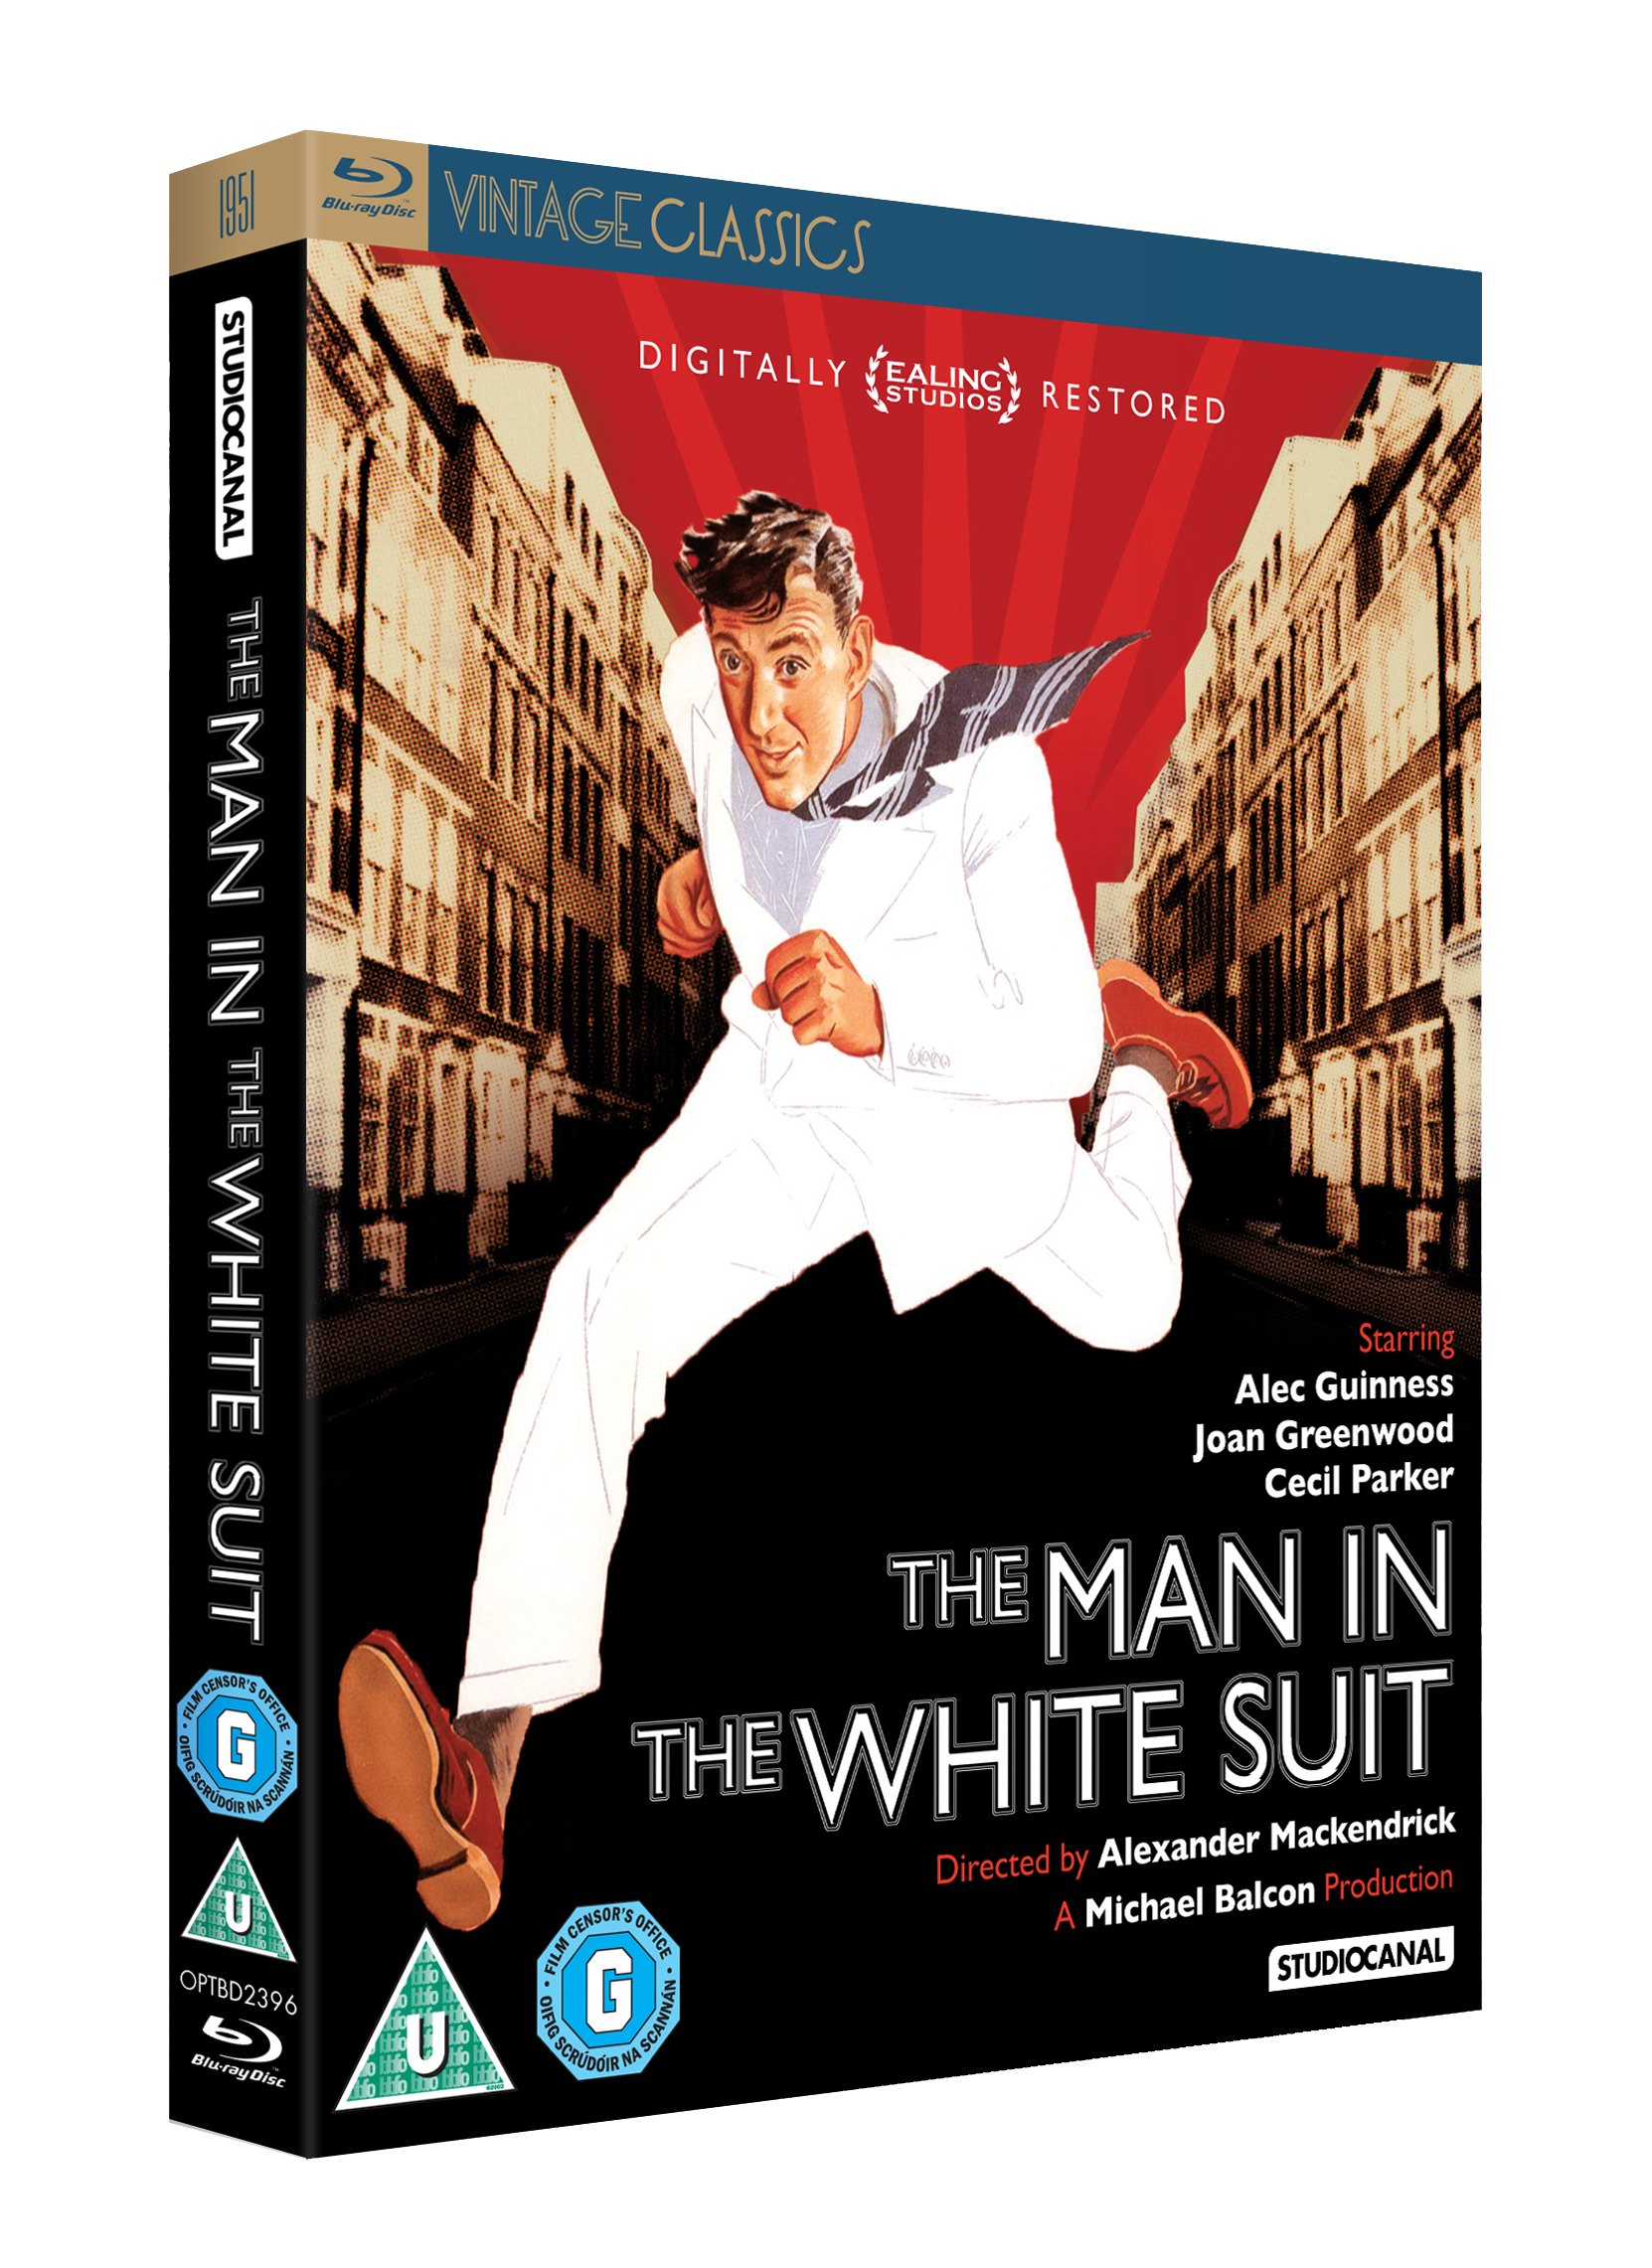 The Man in the White Suit (StudioCanal DVD & Blu-ray)